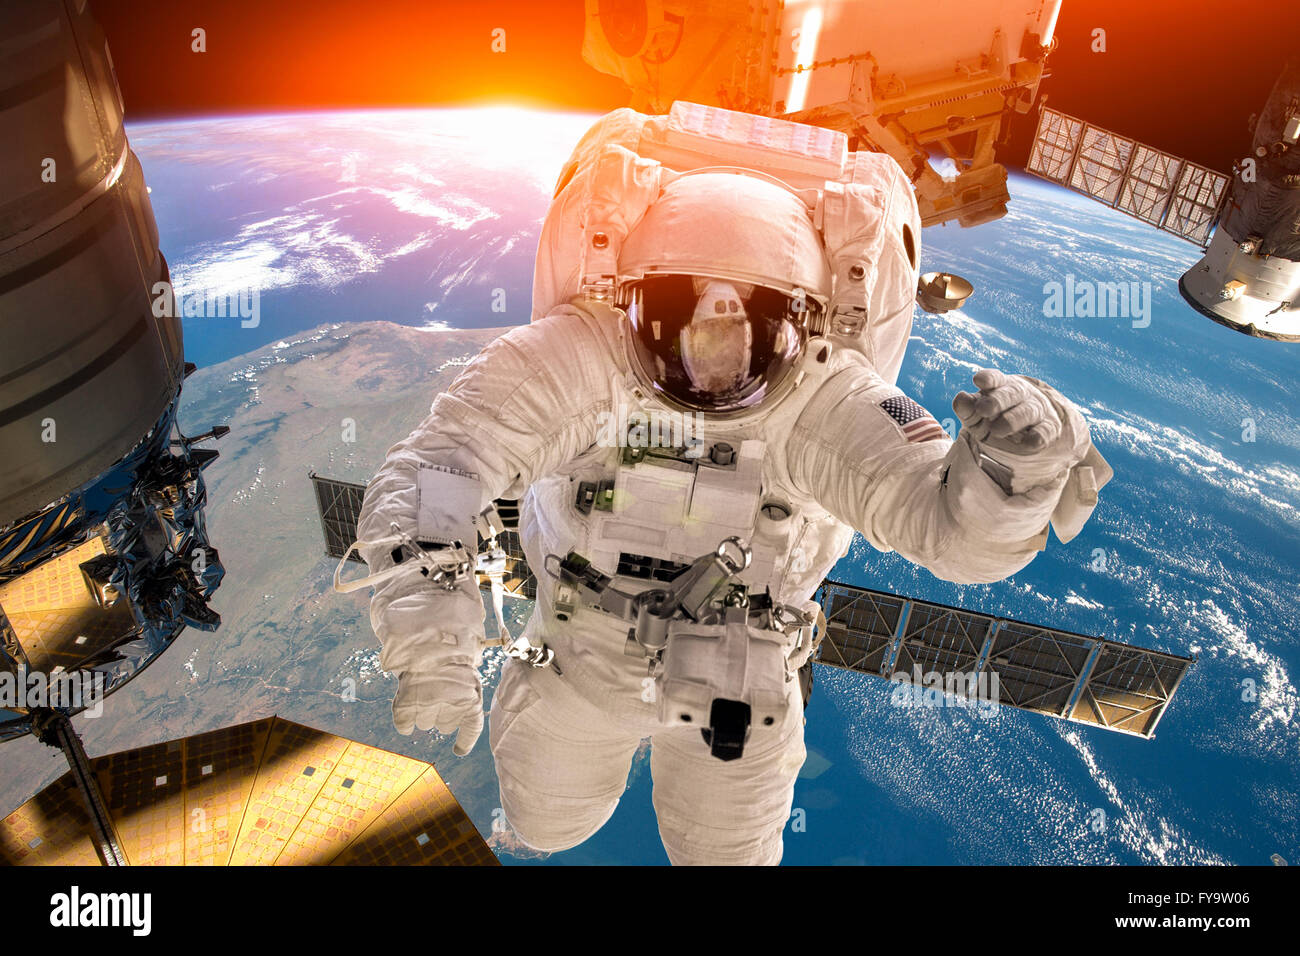 International Space Station and astronaut in outer space over the planet Earth. Elements of this image furnished by NASA. Stock Photo